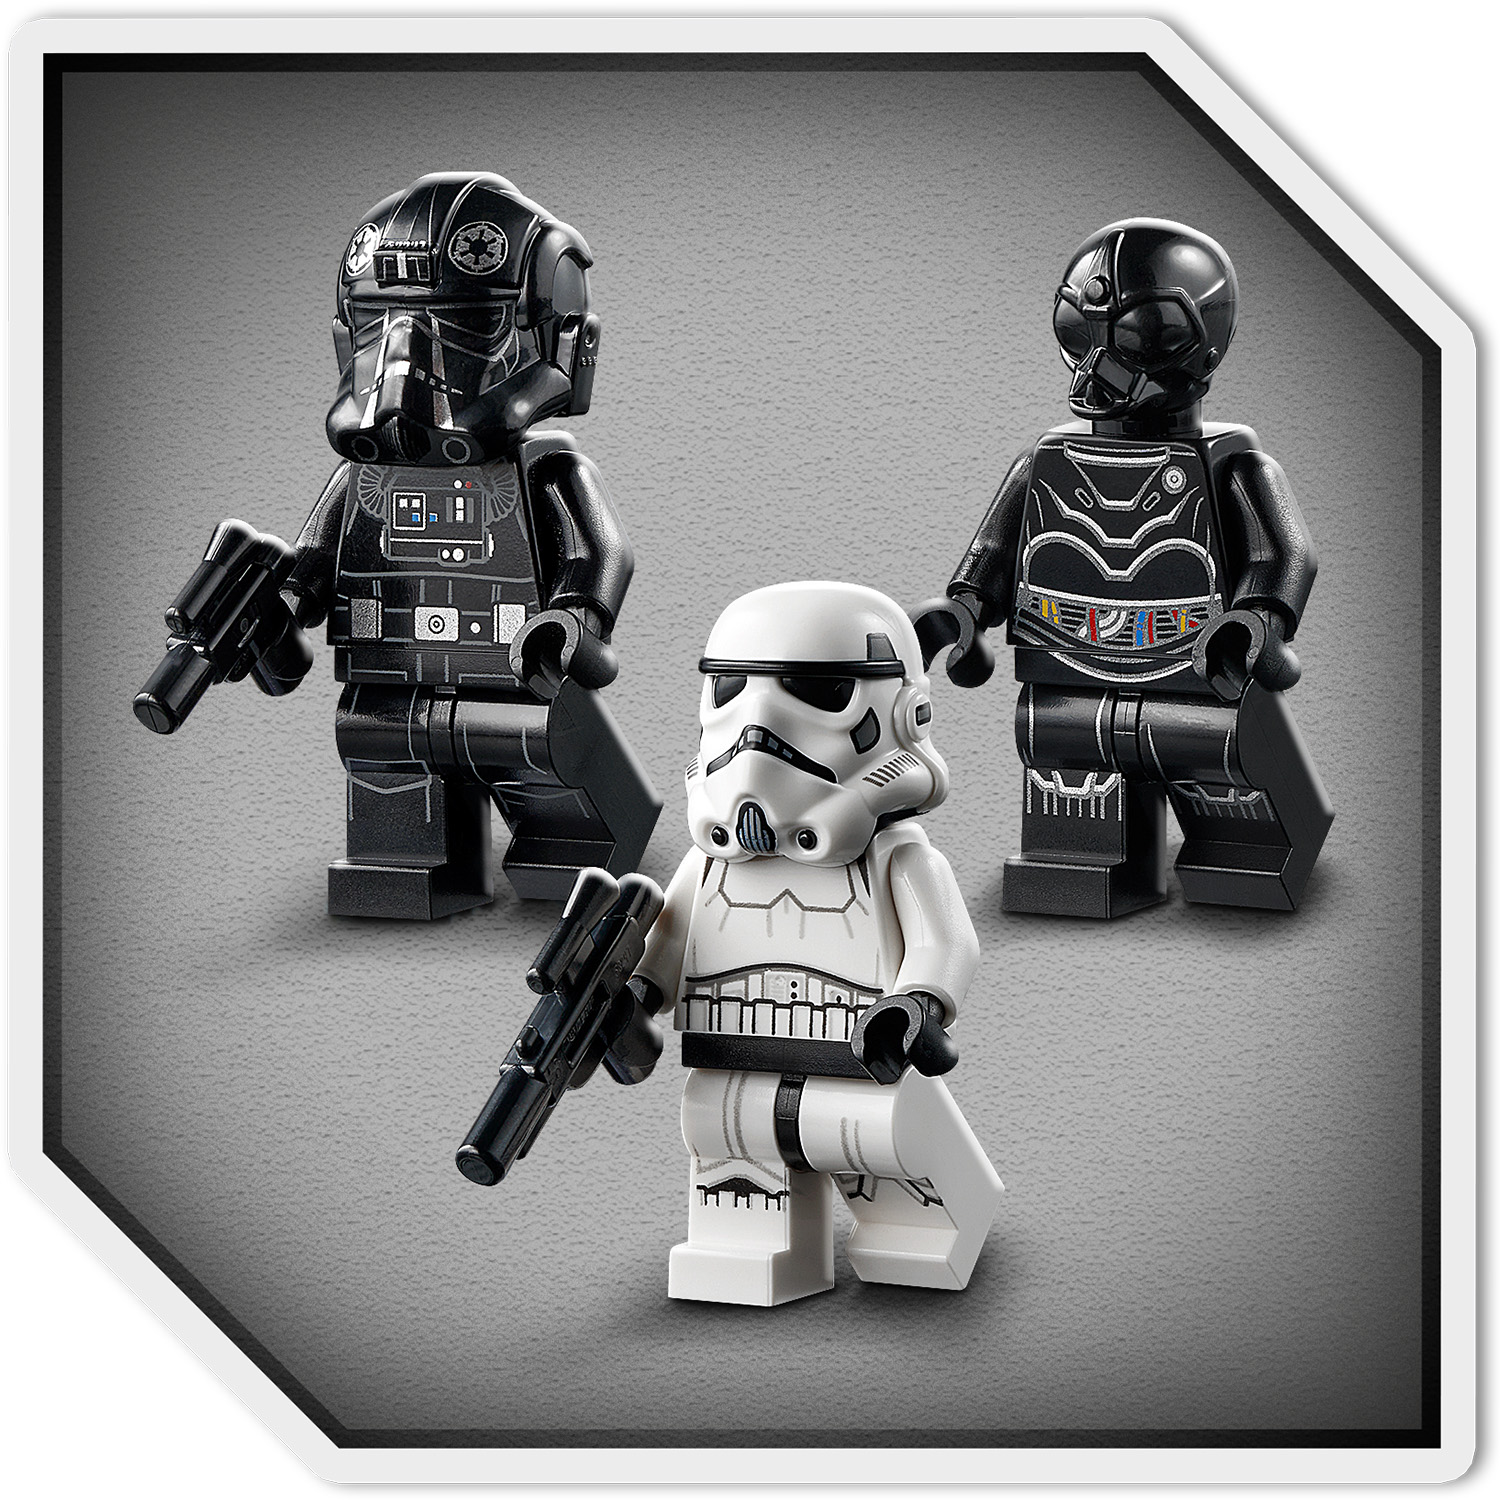 3 LEGO® Star Wars™ characters